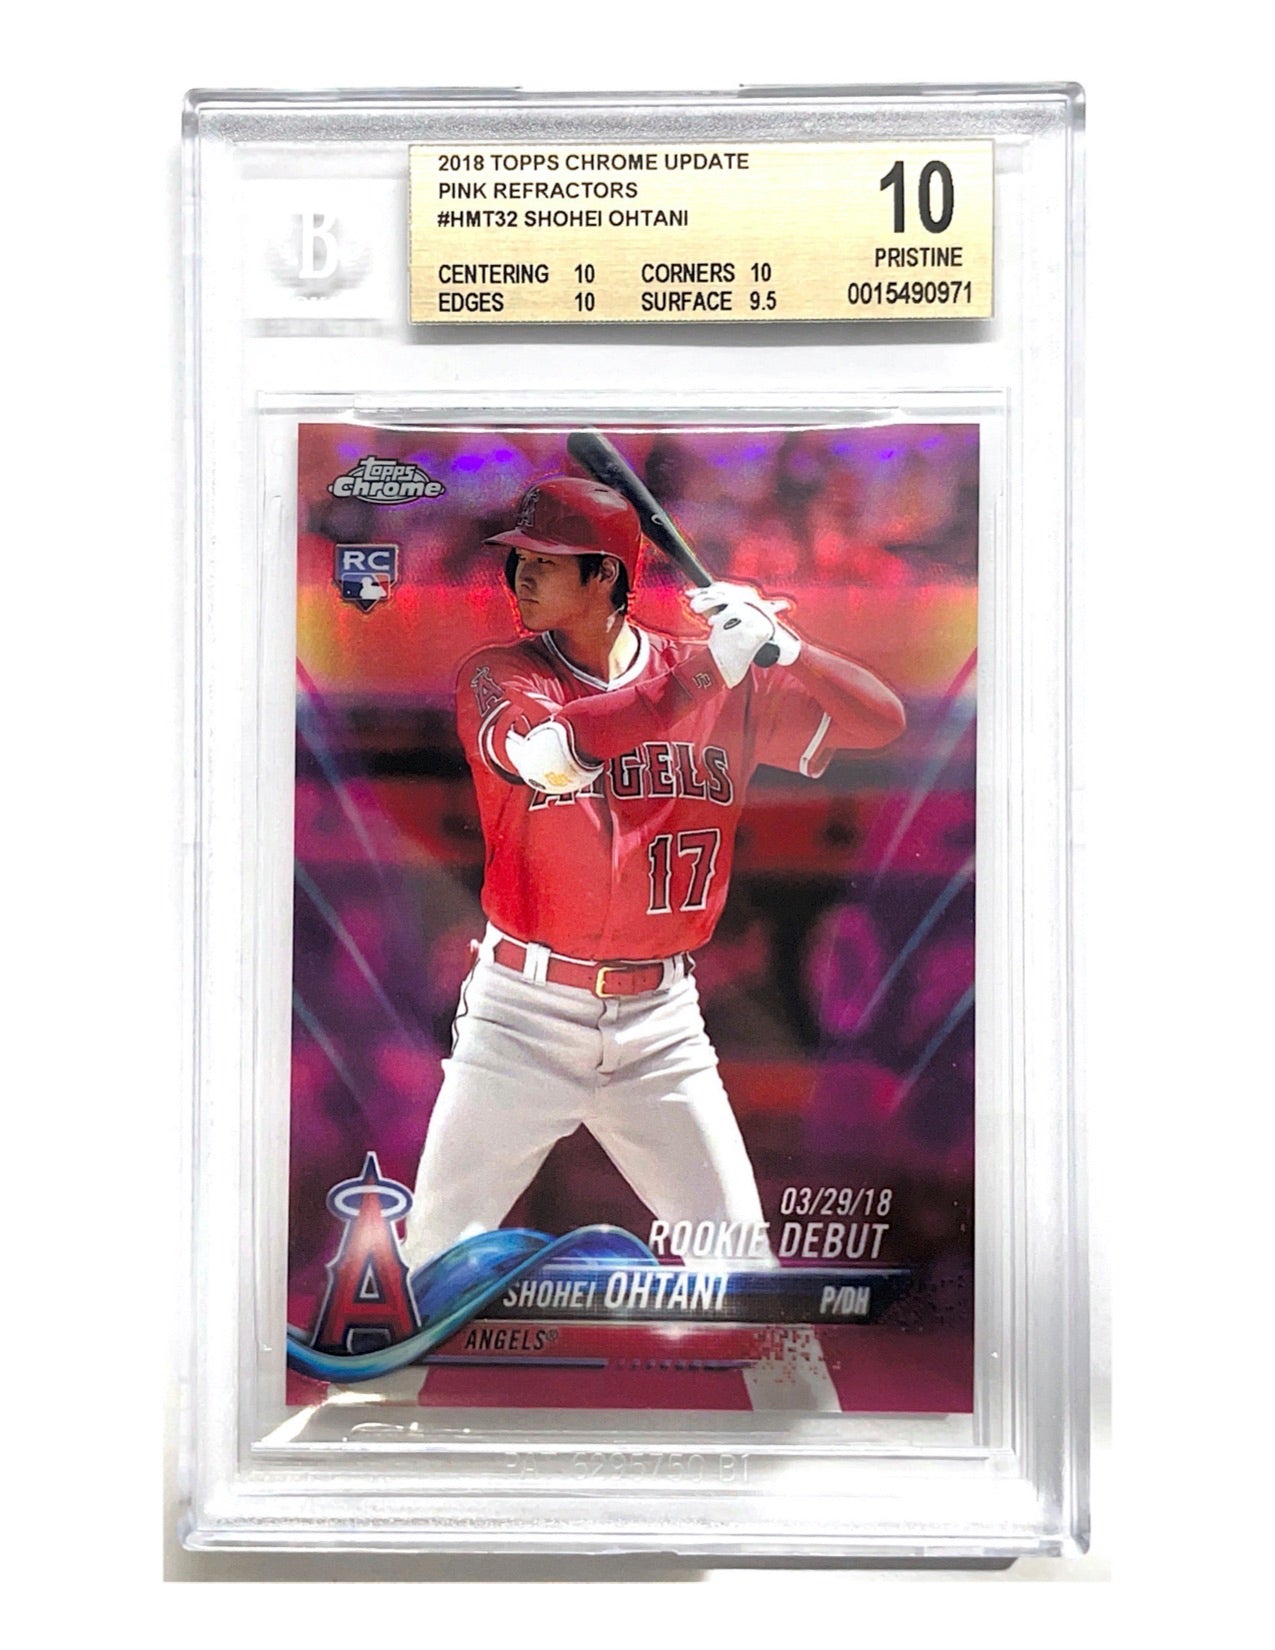 Shohei Ohtani 2018 Topps Chrome Update Pink Refractor Rookie #HMT32 - BGS 10